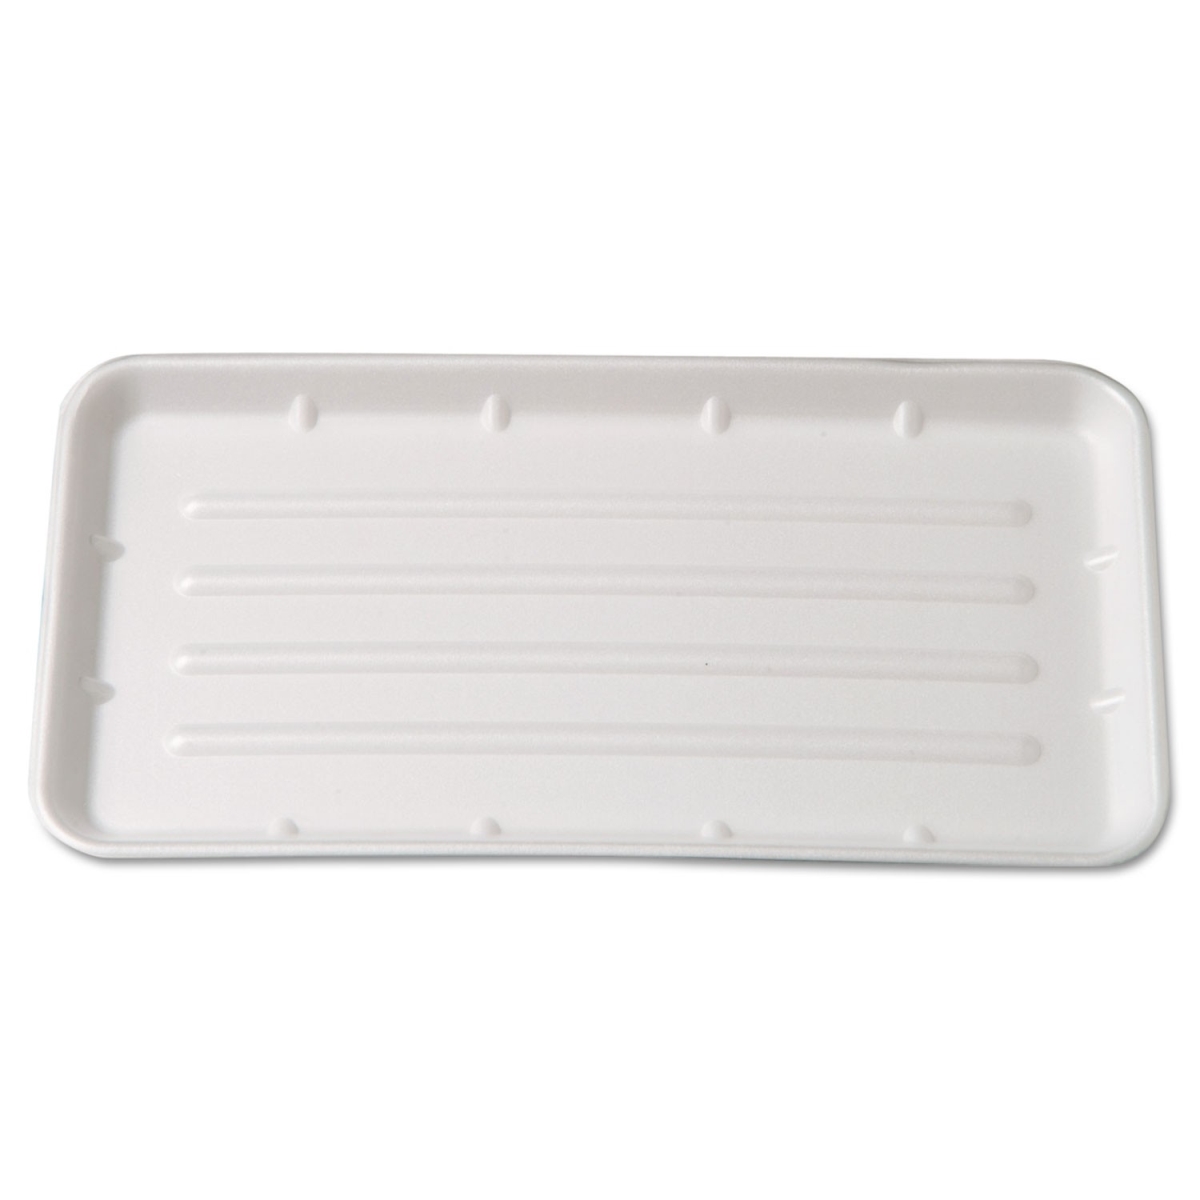 25swh 8 X 14.75 X 1 In. Supermarket Foam, Trays, White, 125 Per Bag - Bags Of 2